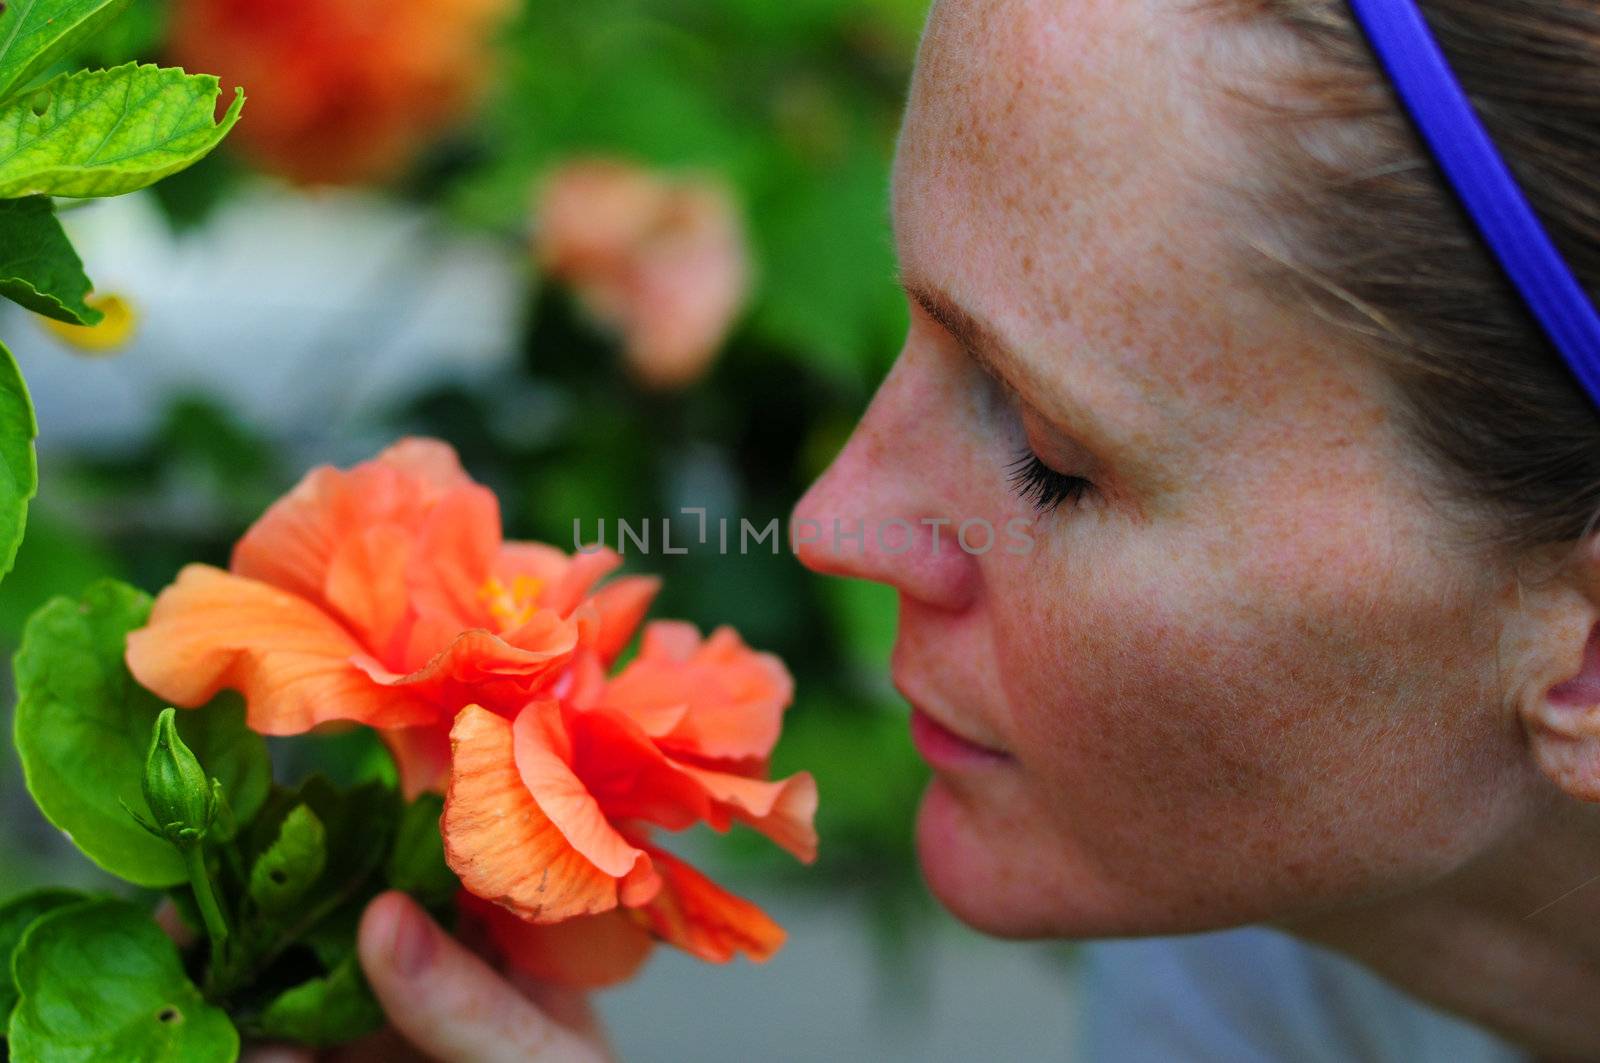 Pretty woman smelling flowers by ftlaudgirl